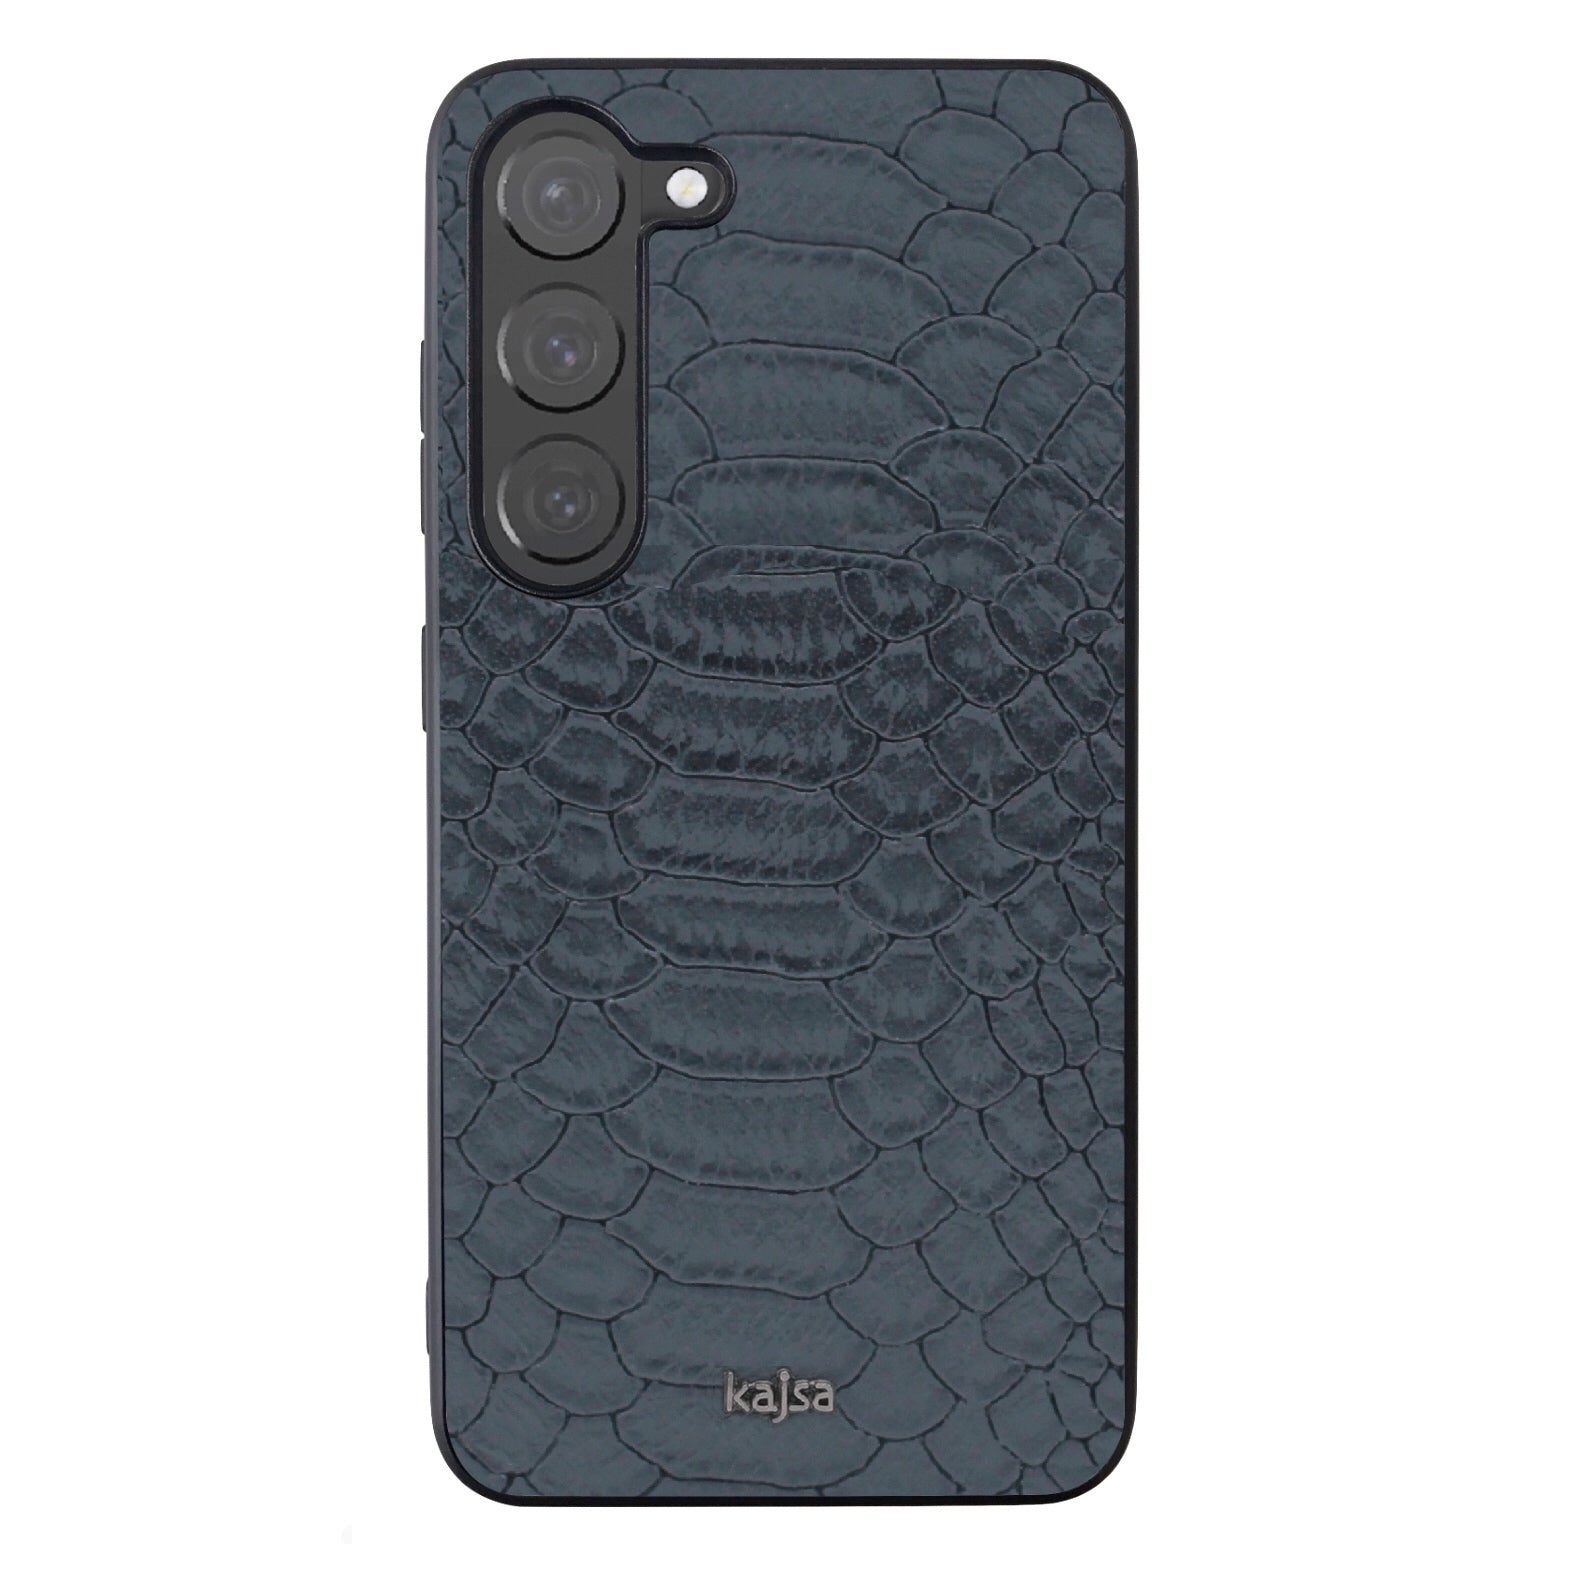 Glamorous Collection - Snake Pattern Back Case for Samsung Galaxy S23/S23+/S23 Ultra-Phone Case- phone case - phone cases- phone cover- iphone cover- iphone case- iphone cases- leather case- leather cases- DIYCASE - custom case - leather cover - hand strap case - croco pattern case - snake pattern case - carbon fiber phone case - phone case brand - unique phone case - high quality - phone case brand - protective case - buy phone case hong kong - online buy phone case - iphone‎手機殼 - 客製化手機殼 - samsung ‎手機殼 - 香